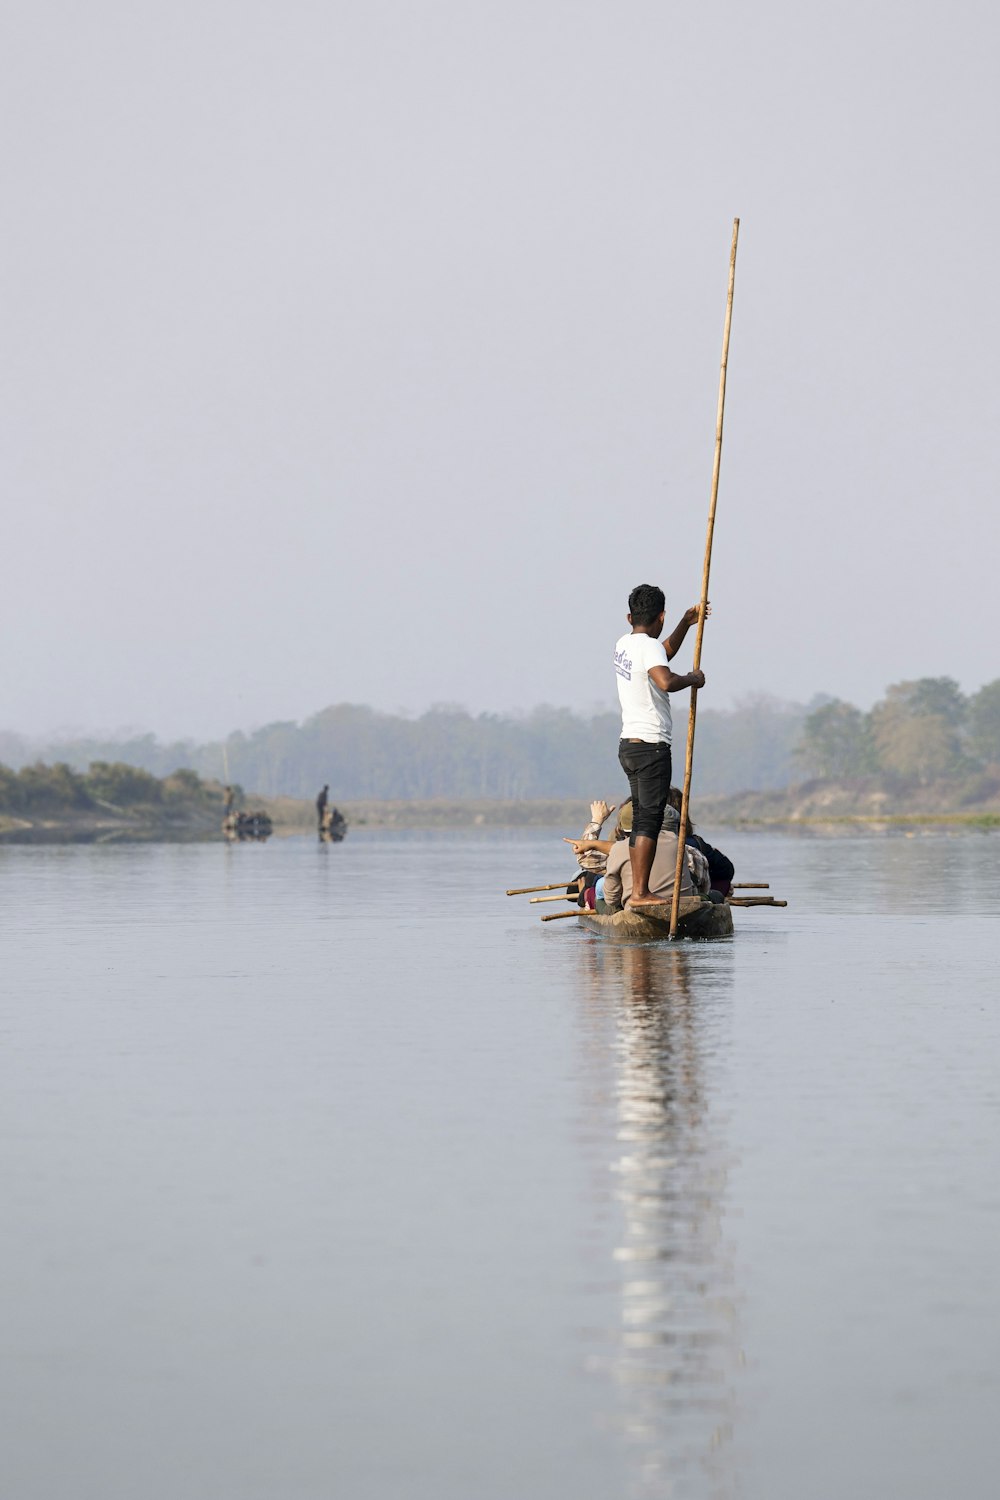 a man on a boat with a pole in the water